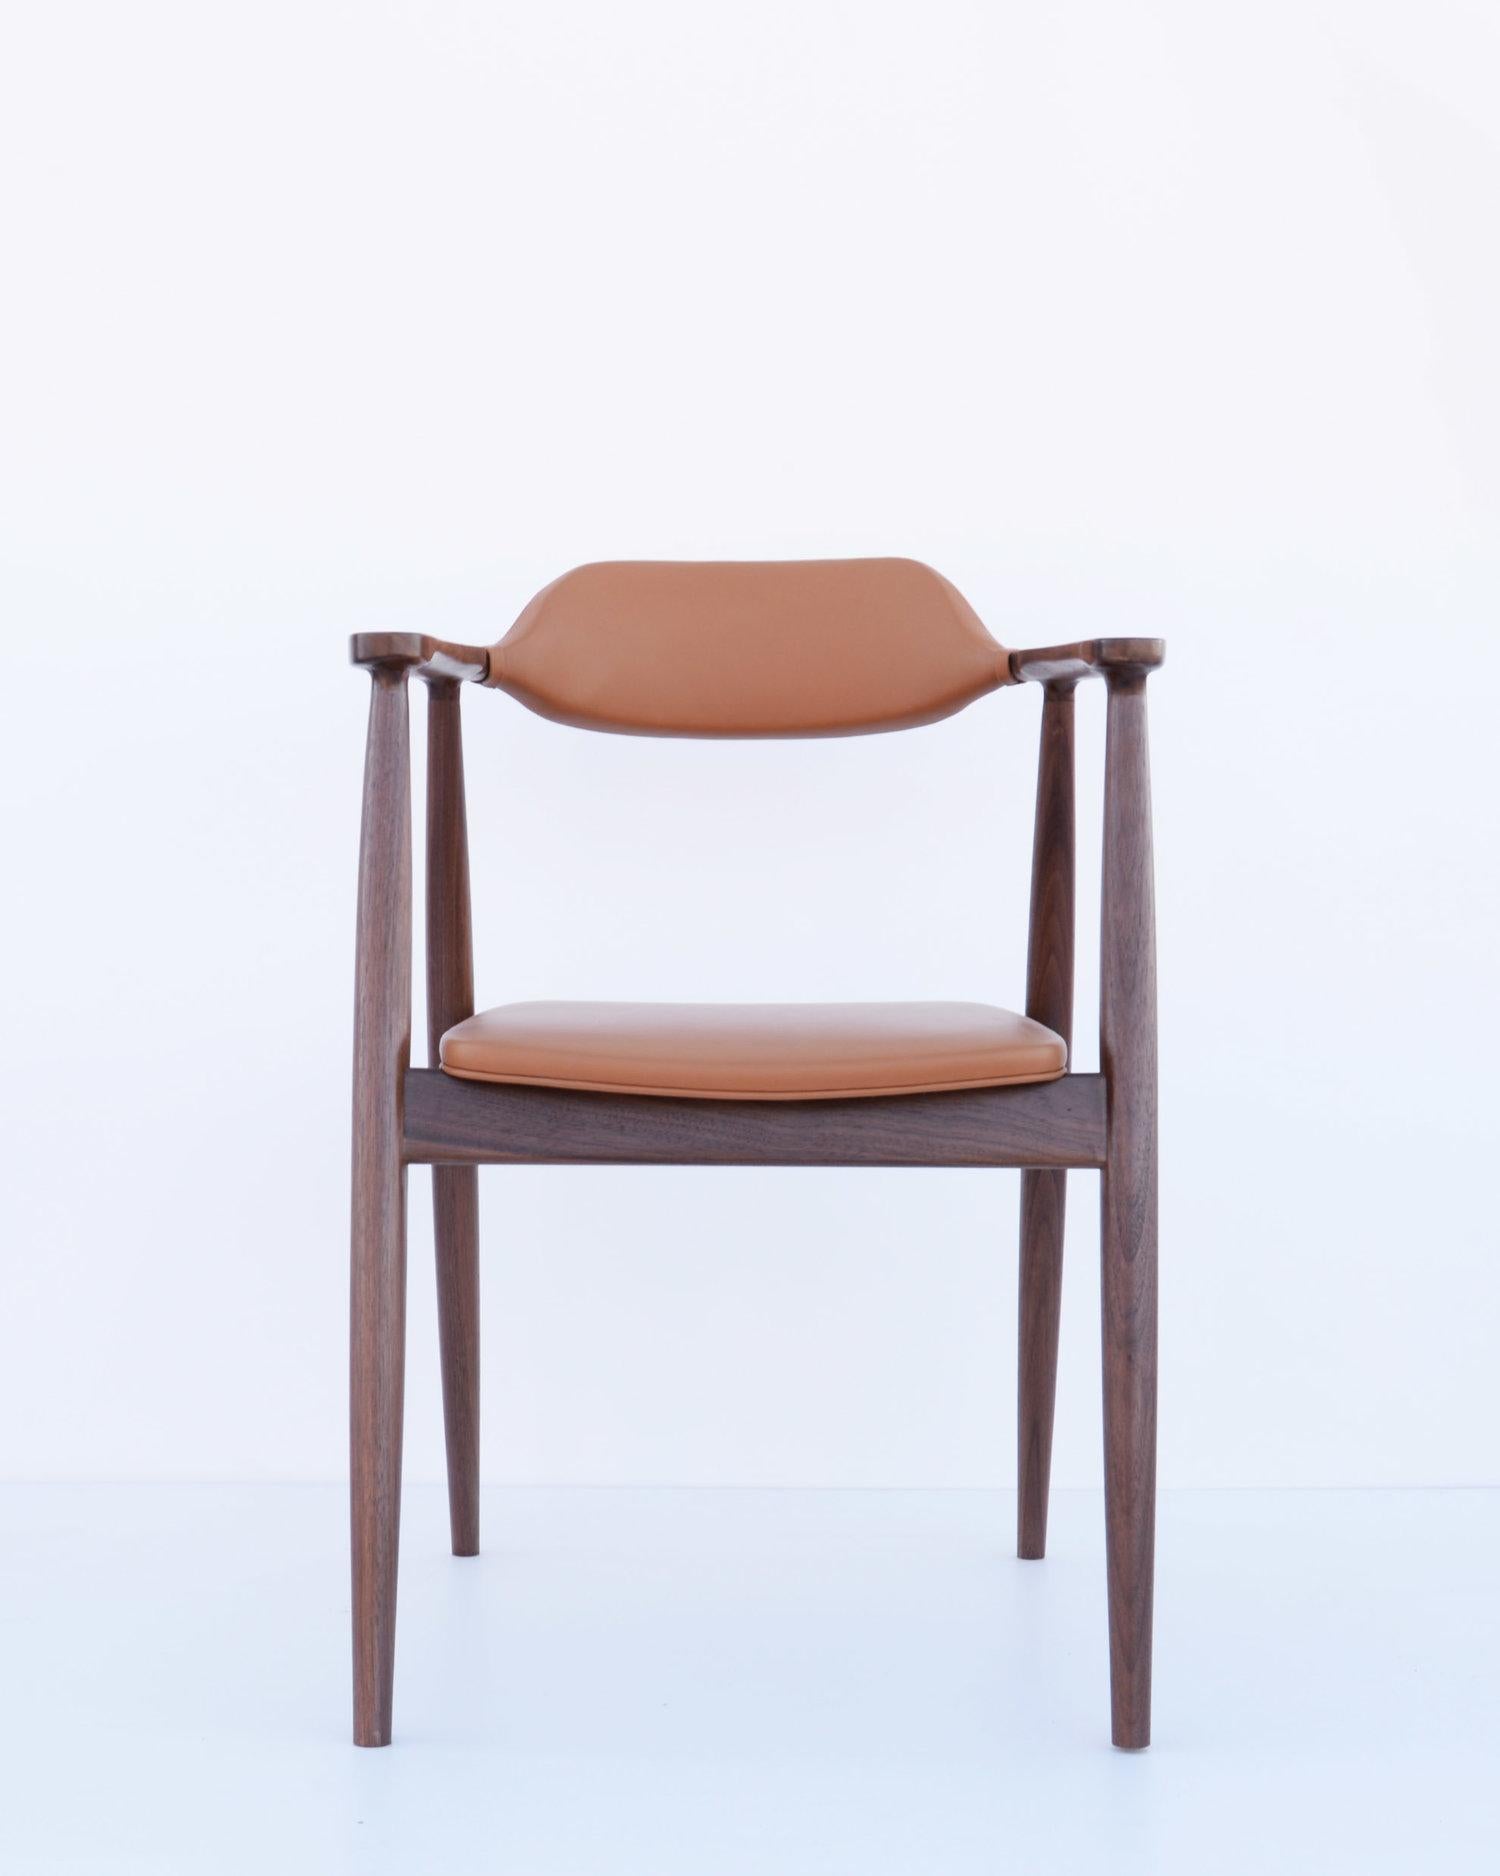 Materials : 
[First Photos] 
Bleached white oak polyurethane finish 
Light brown natural leather with 1” form cushion upholstery seat and chair back
Materials : 
[Second Photos]
Solid walnut Polyurethane finish 
Light brown natural leather